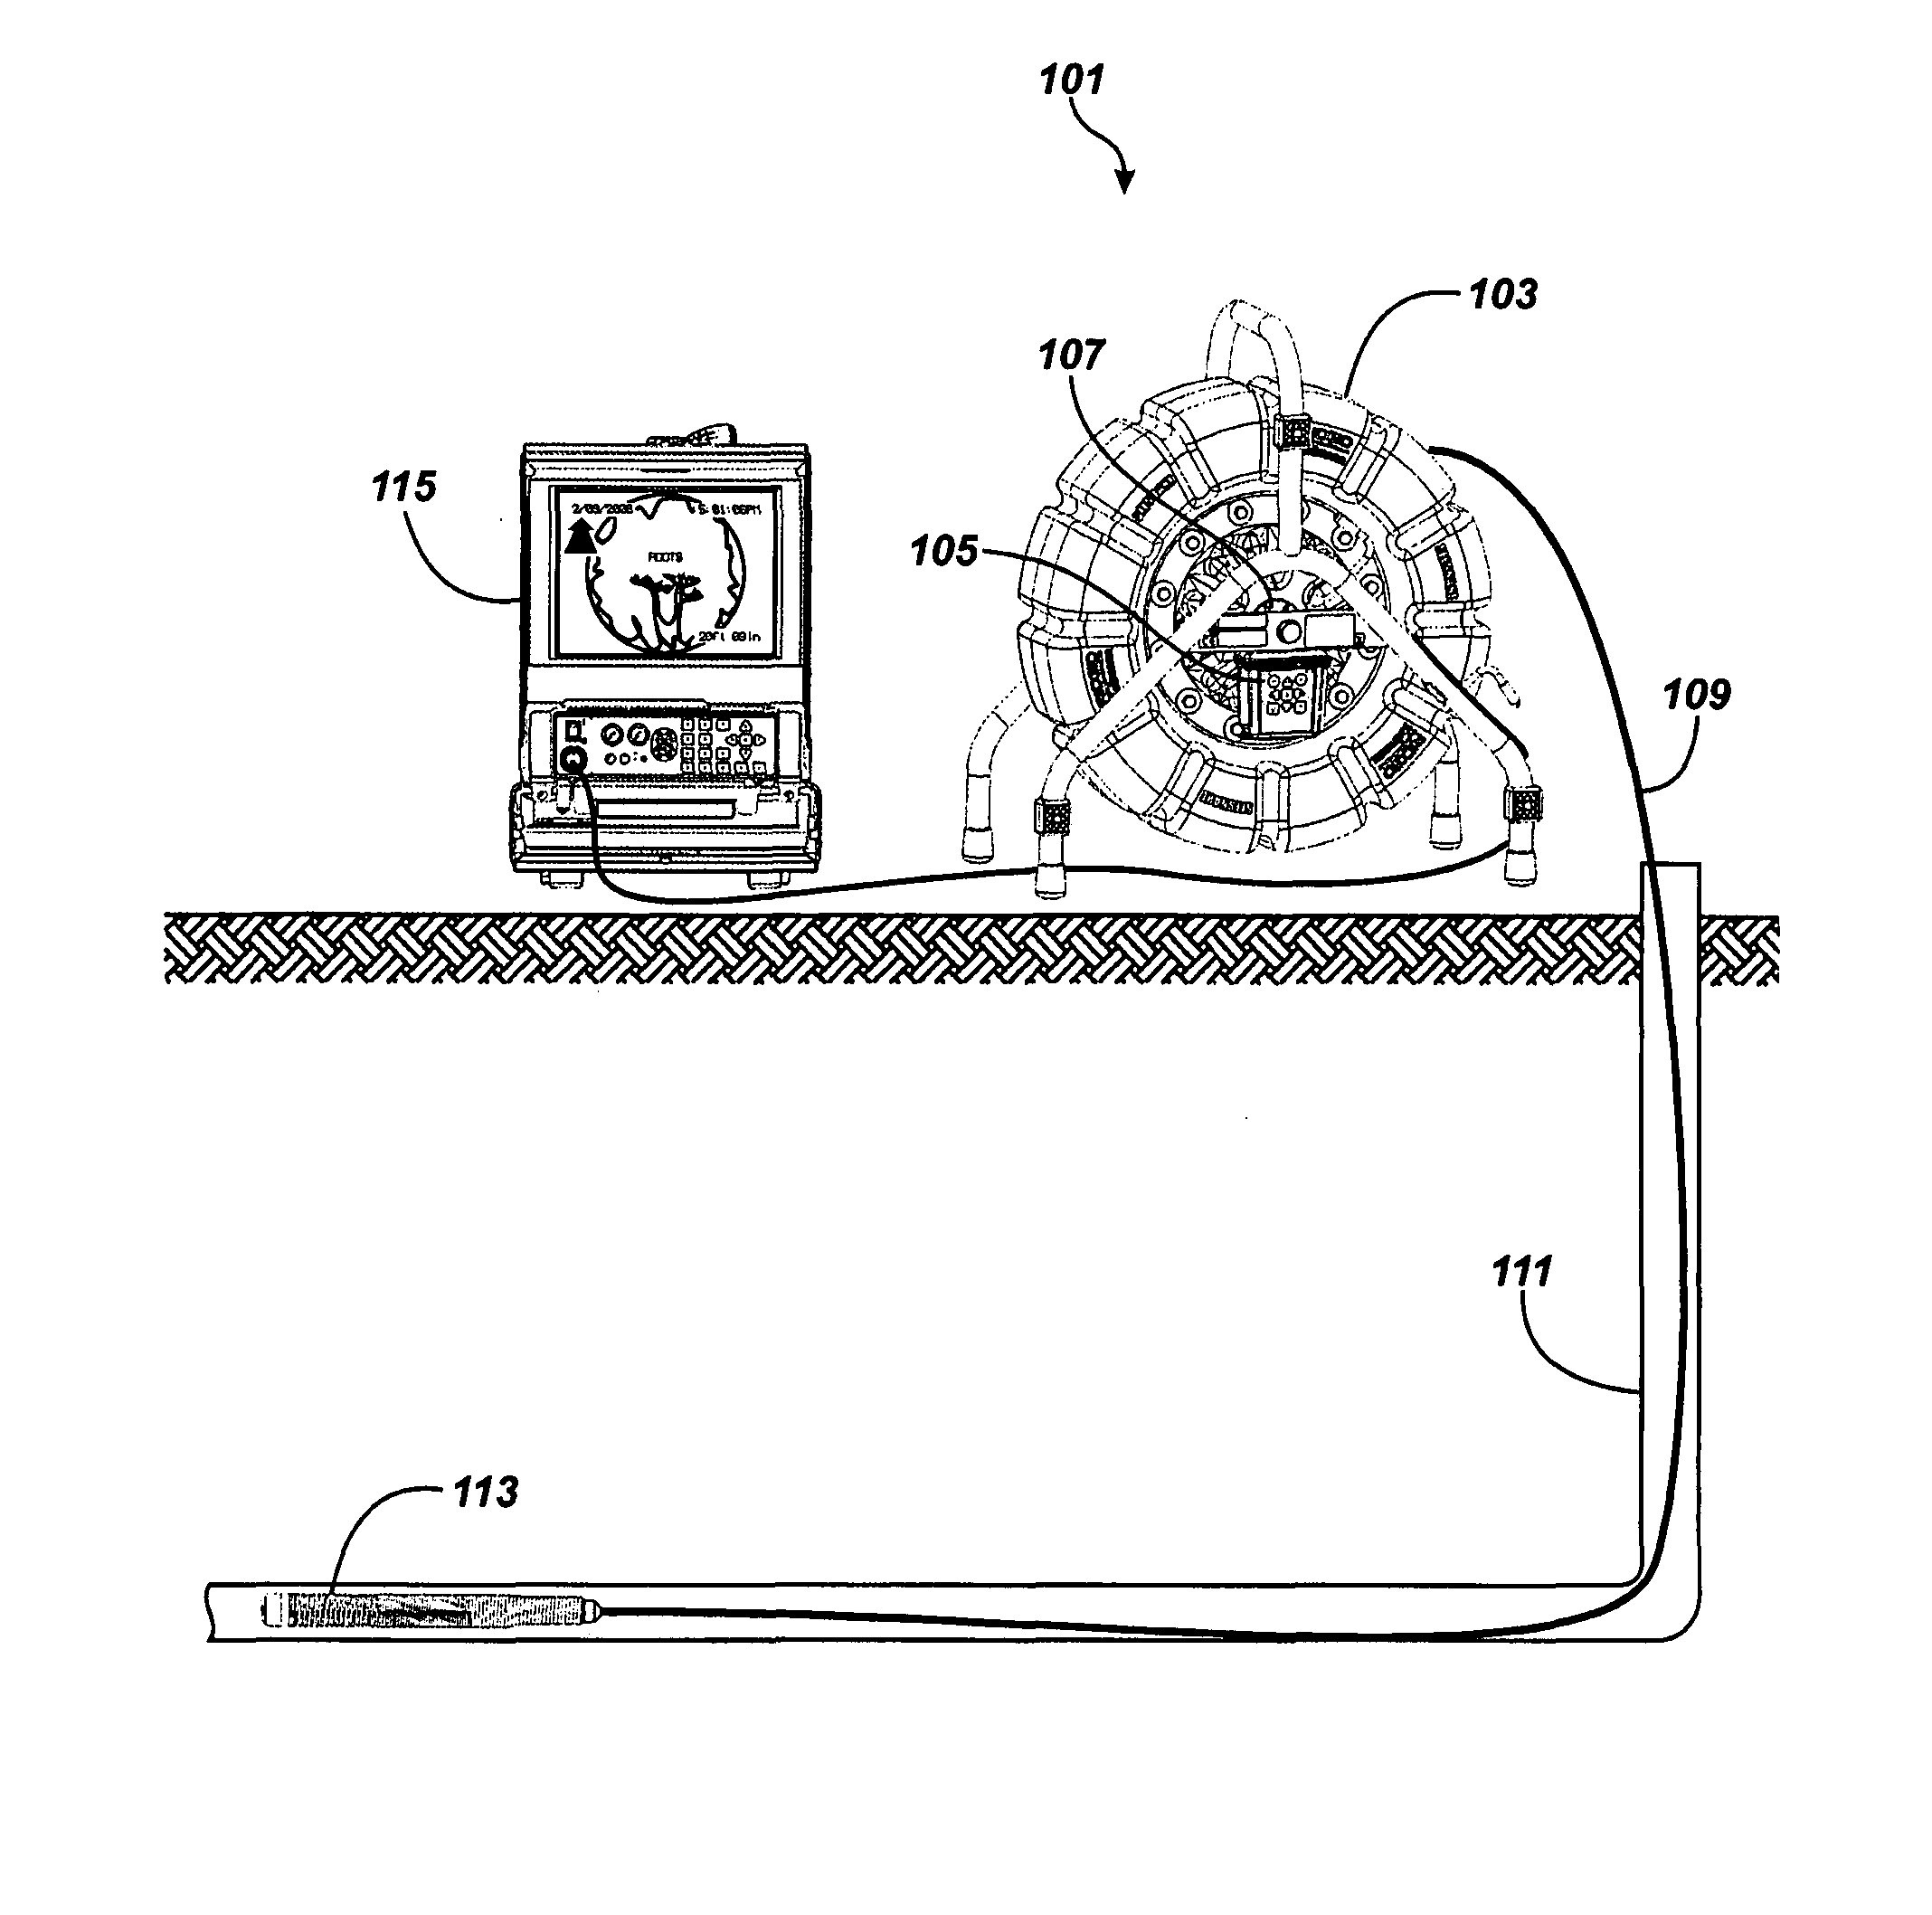 Pipe inspection system with selective image capture